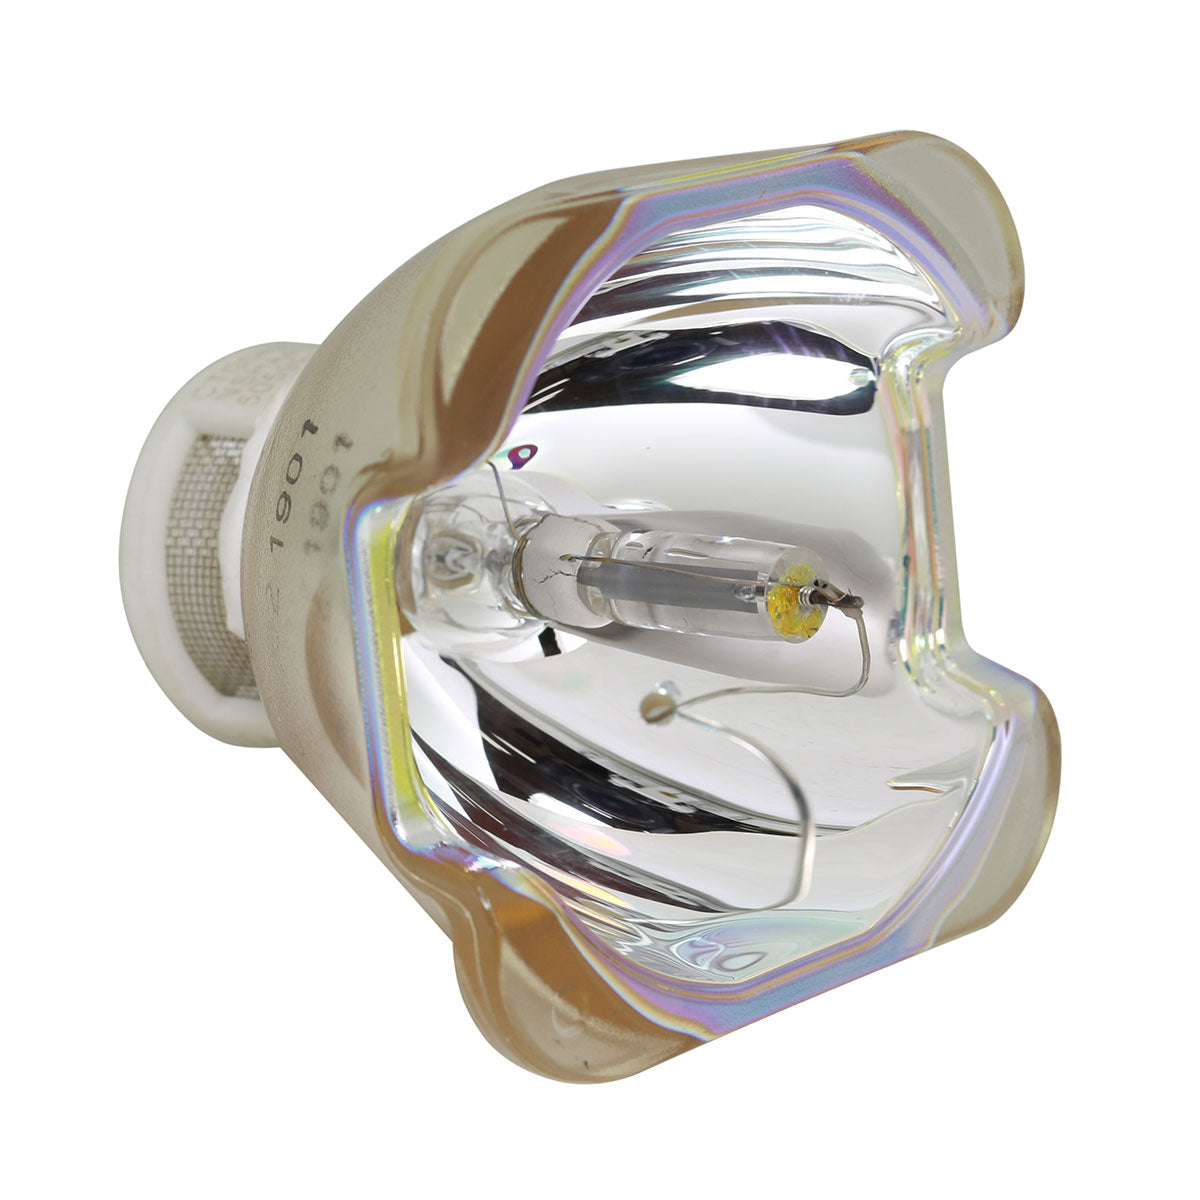 ProjectionDesign 400-0660-00 Ushio Projector Bare Lamp